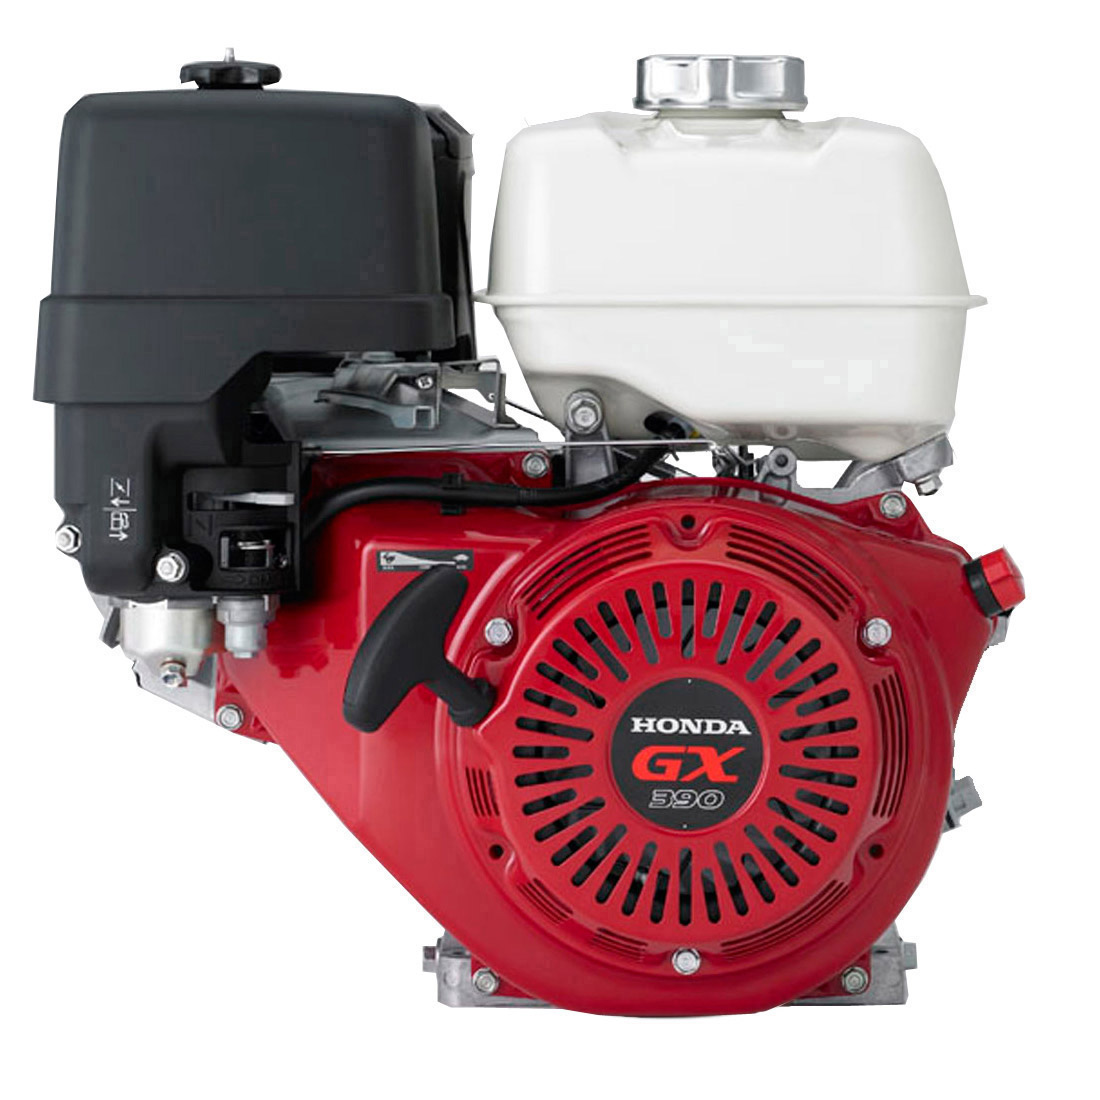 Honda Small Engine Parts for Landscapers in New York City